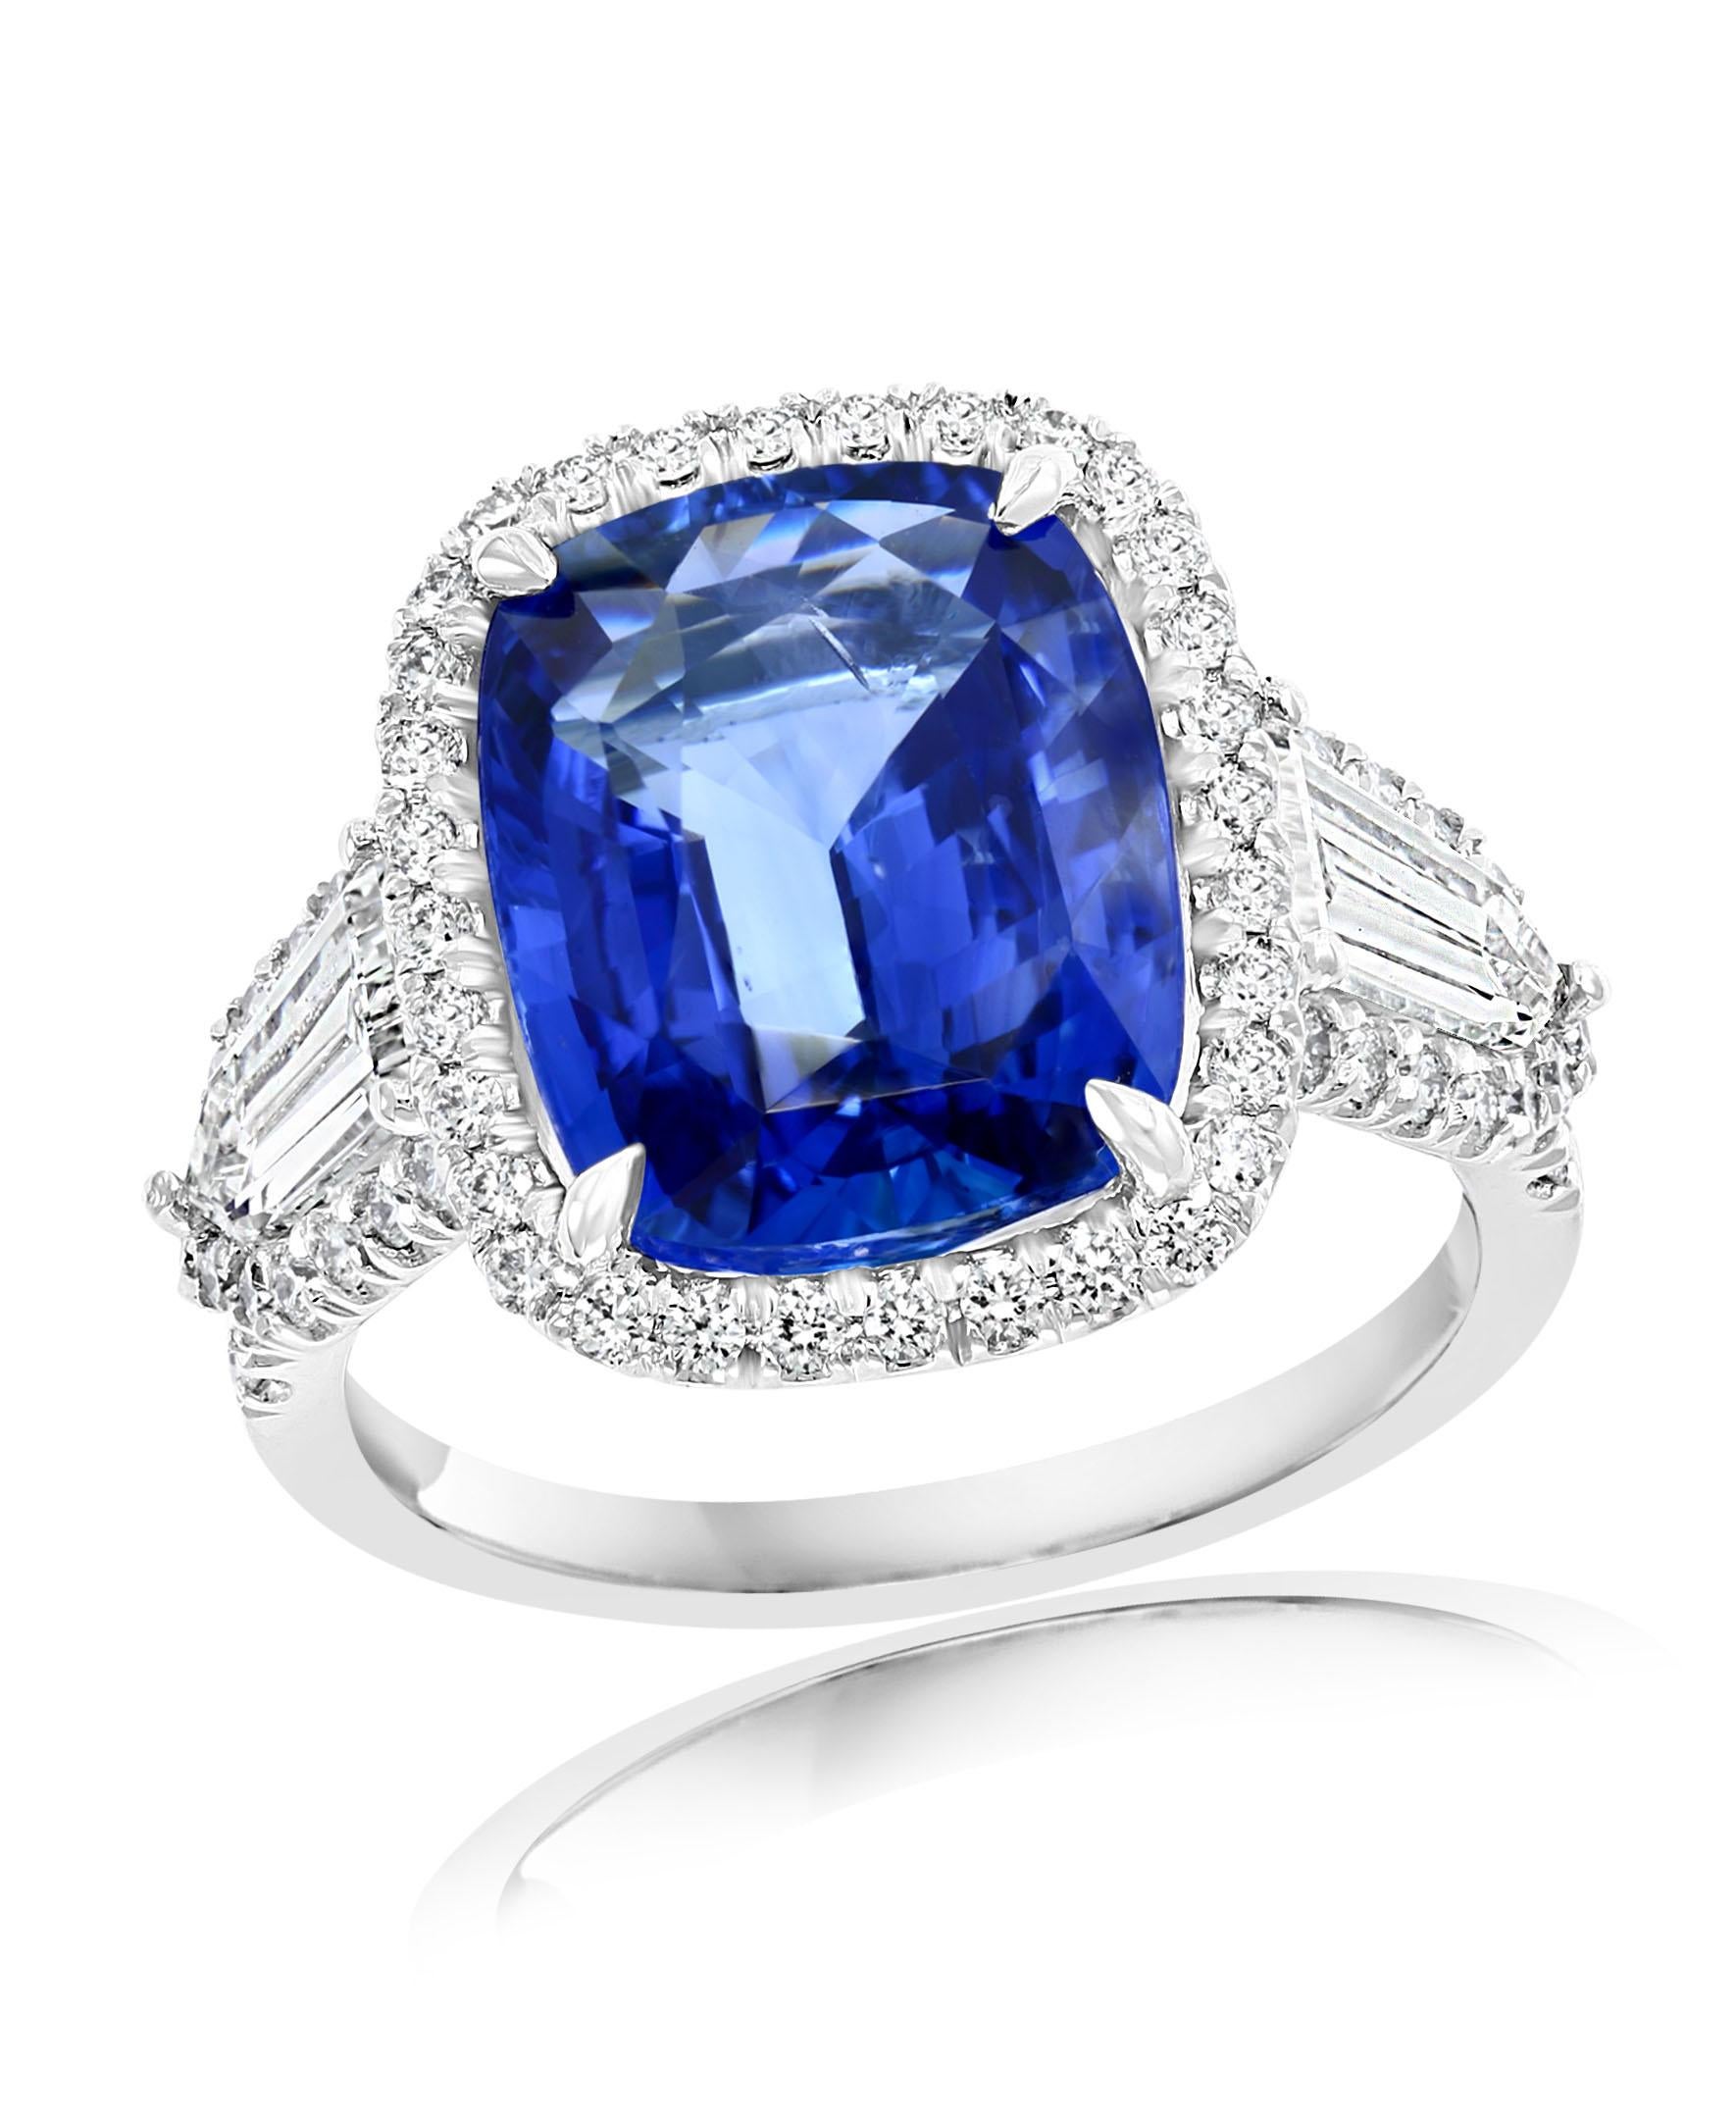 Modern 7.51 Carat Cushion Cut Sapphire and Diamond Engagement Ring in Platinum For Sale